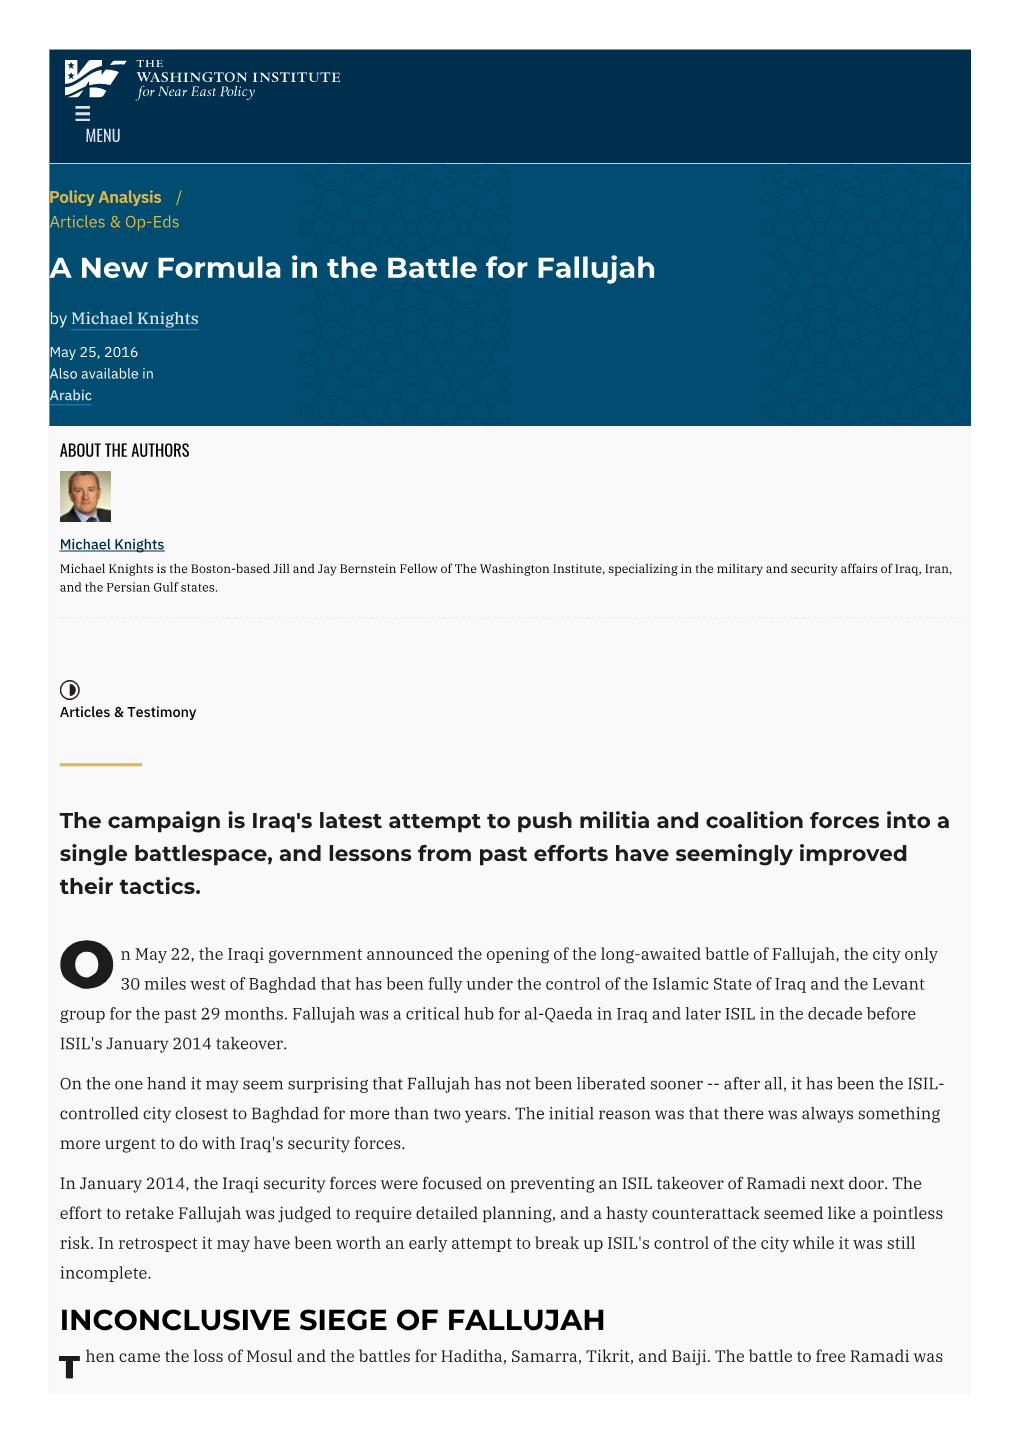 A New Formula in the Battle for Fallujah | the Washington Institute